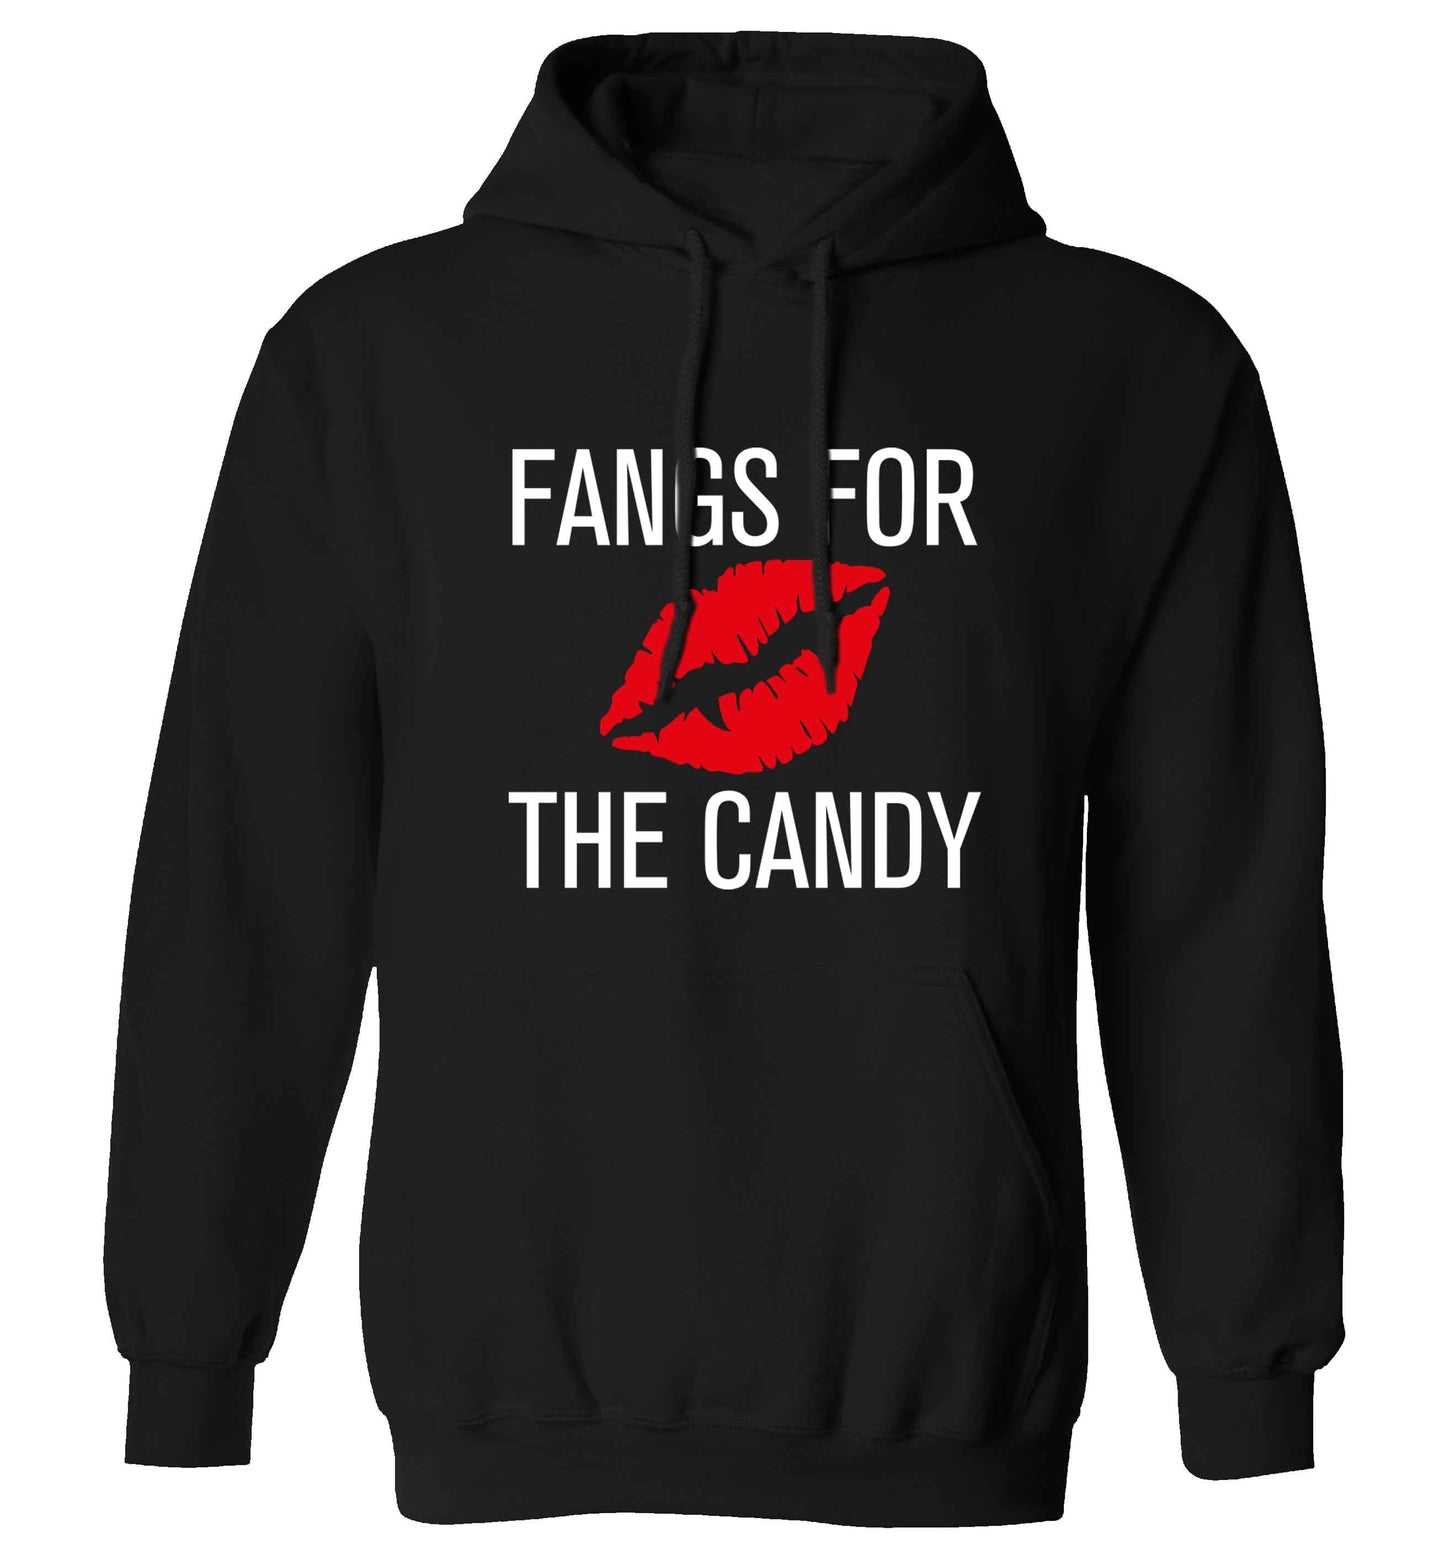 Fangs for the candy adults unisex black hoodie 2XL